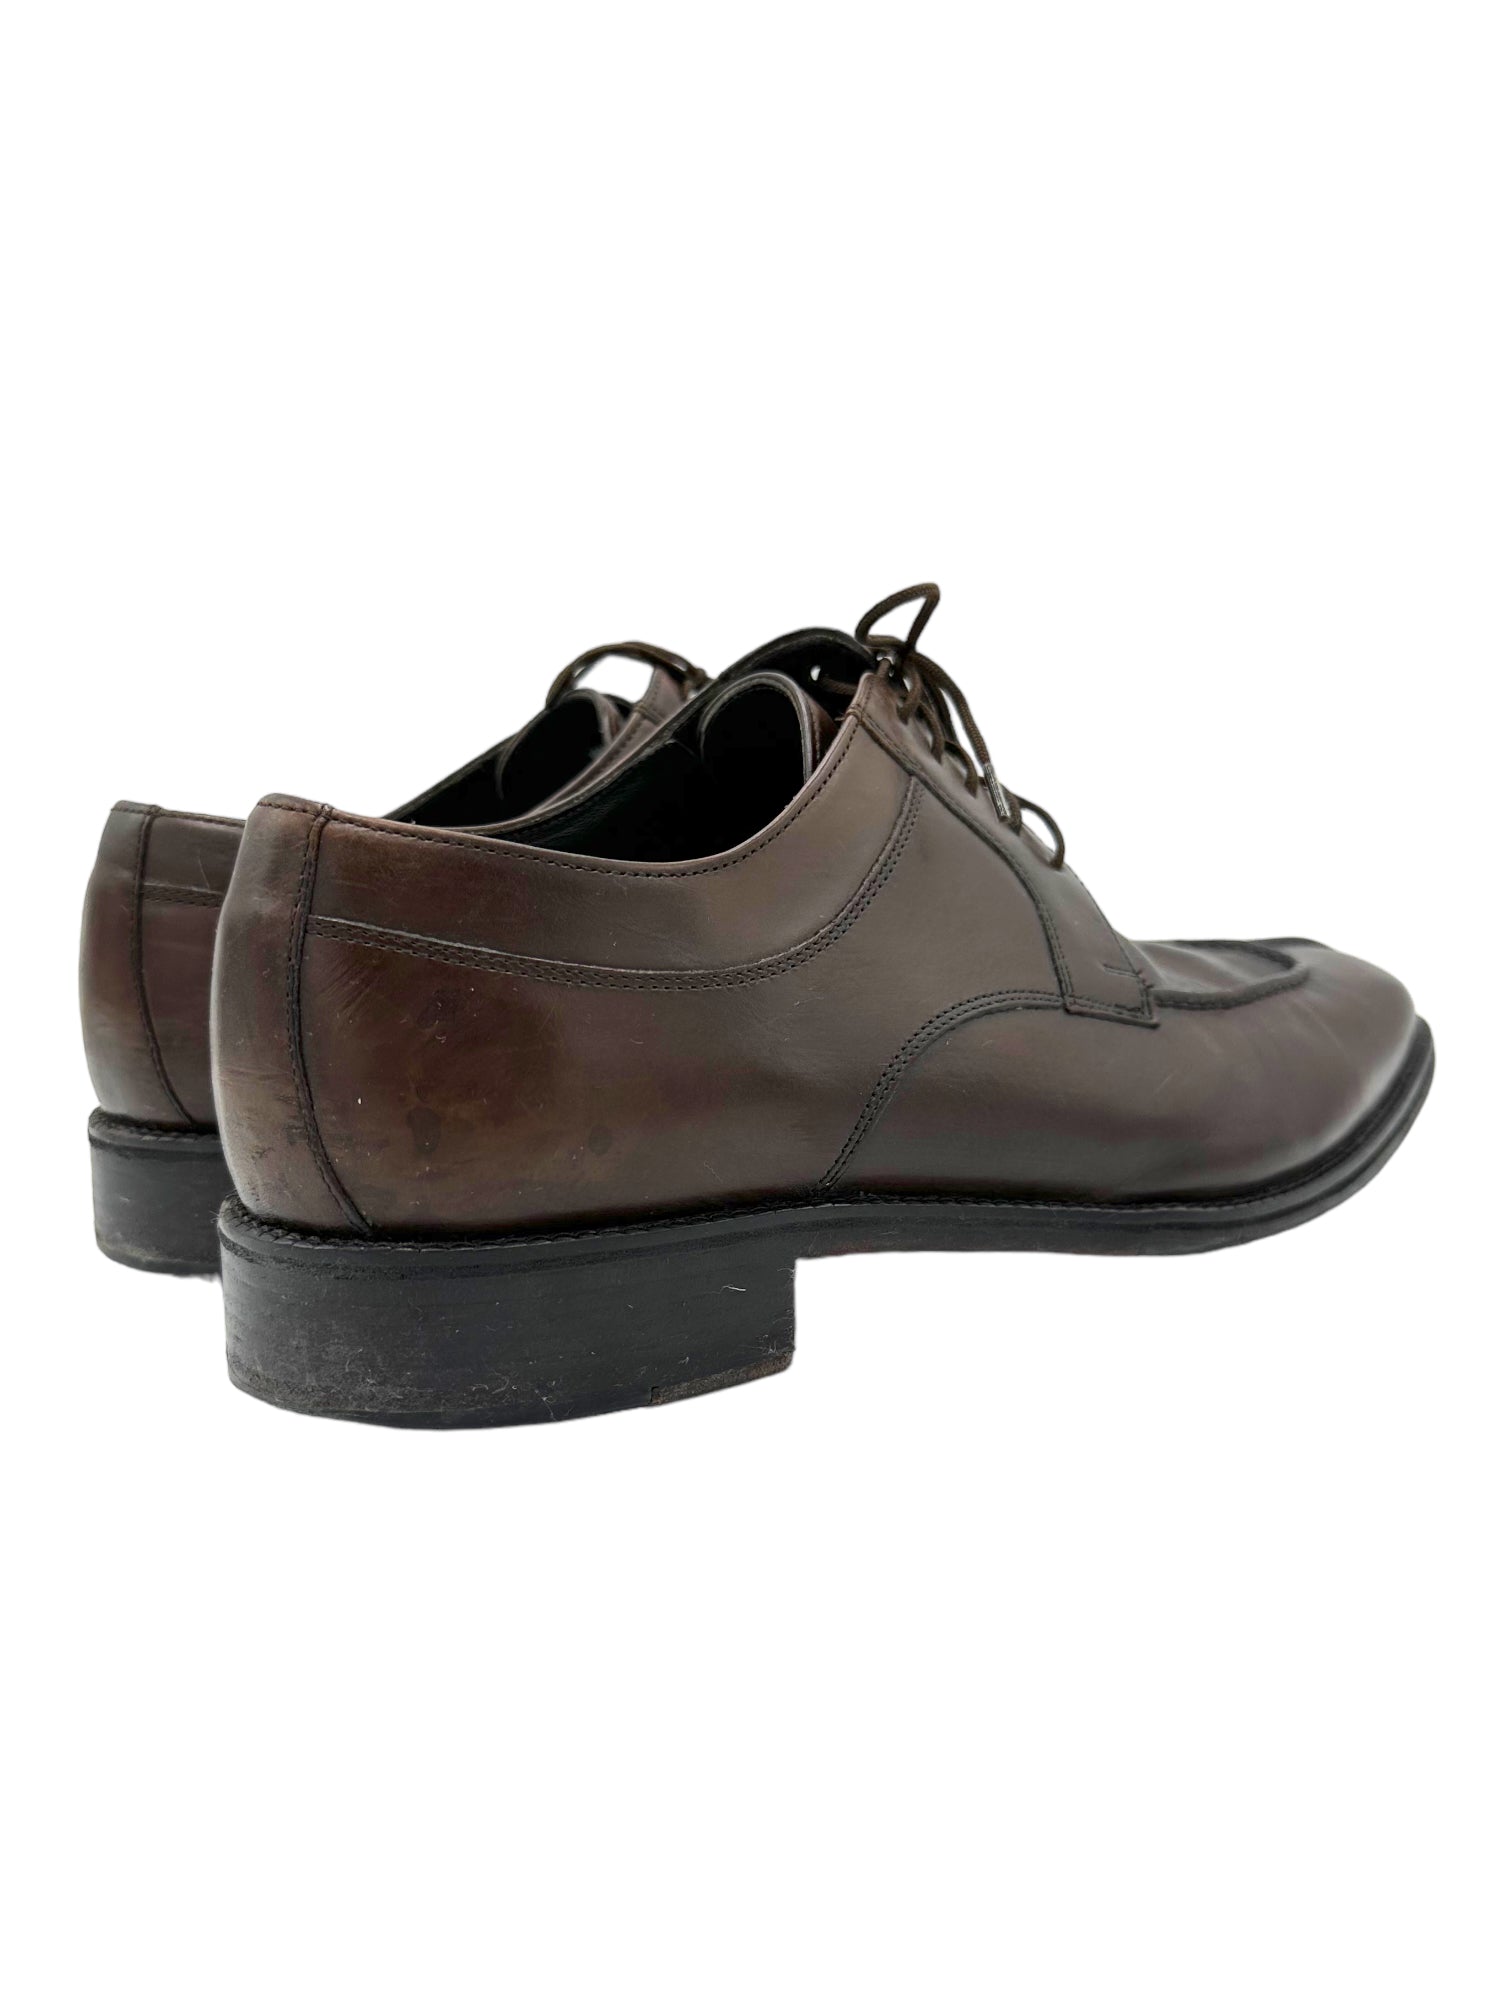 Cole Haan Brown Leather Split Toe Oxford Dress Shoe - Genuine Design luxury consignment Calgary, Canada New and pre-owned clothing, shoes, accessories.